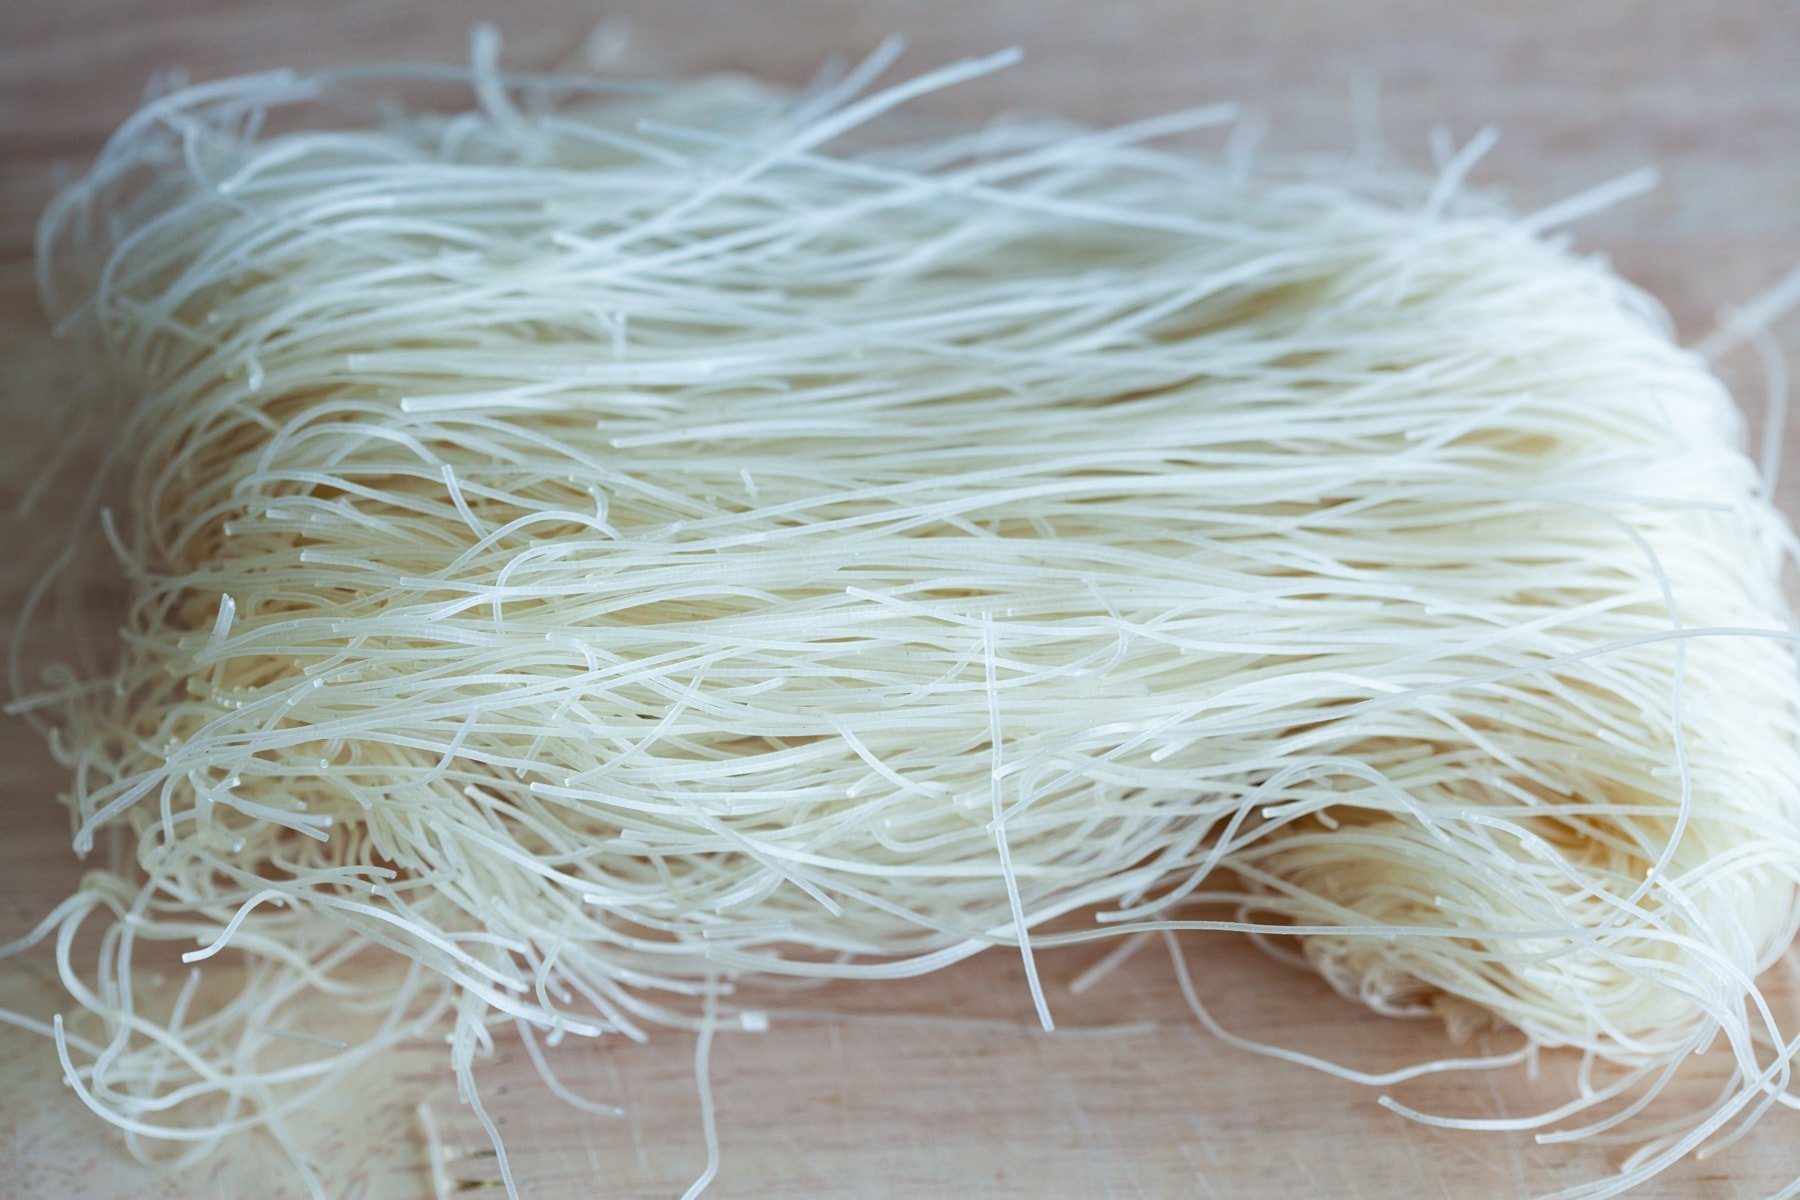 Picture of rice vermicelli or rice noodles.